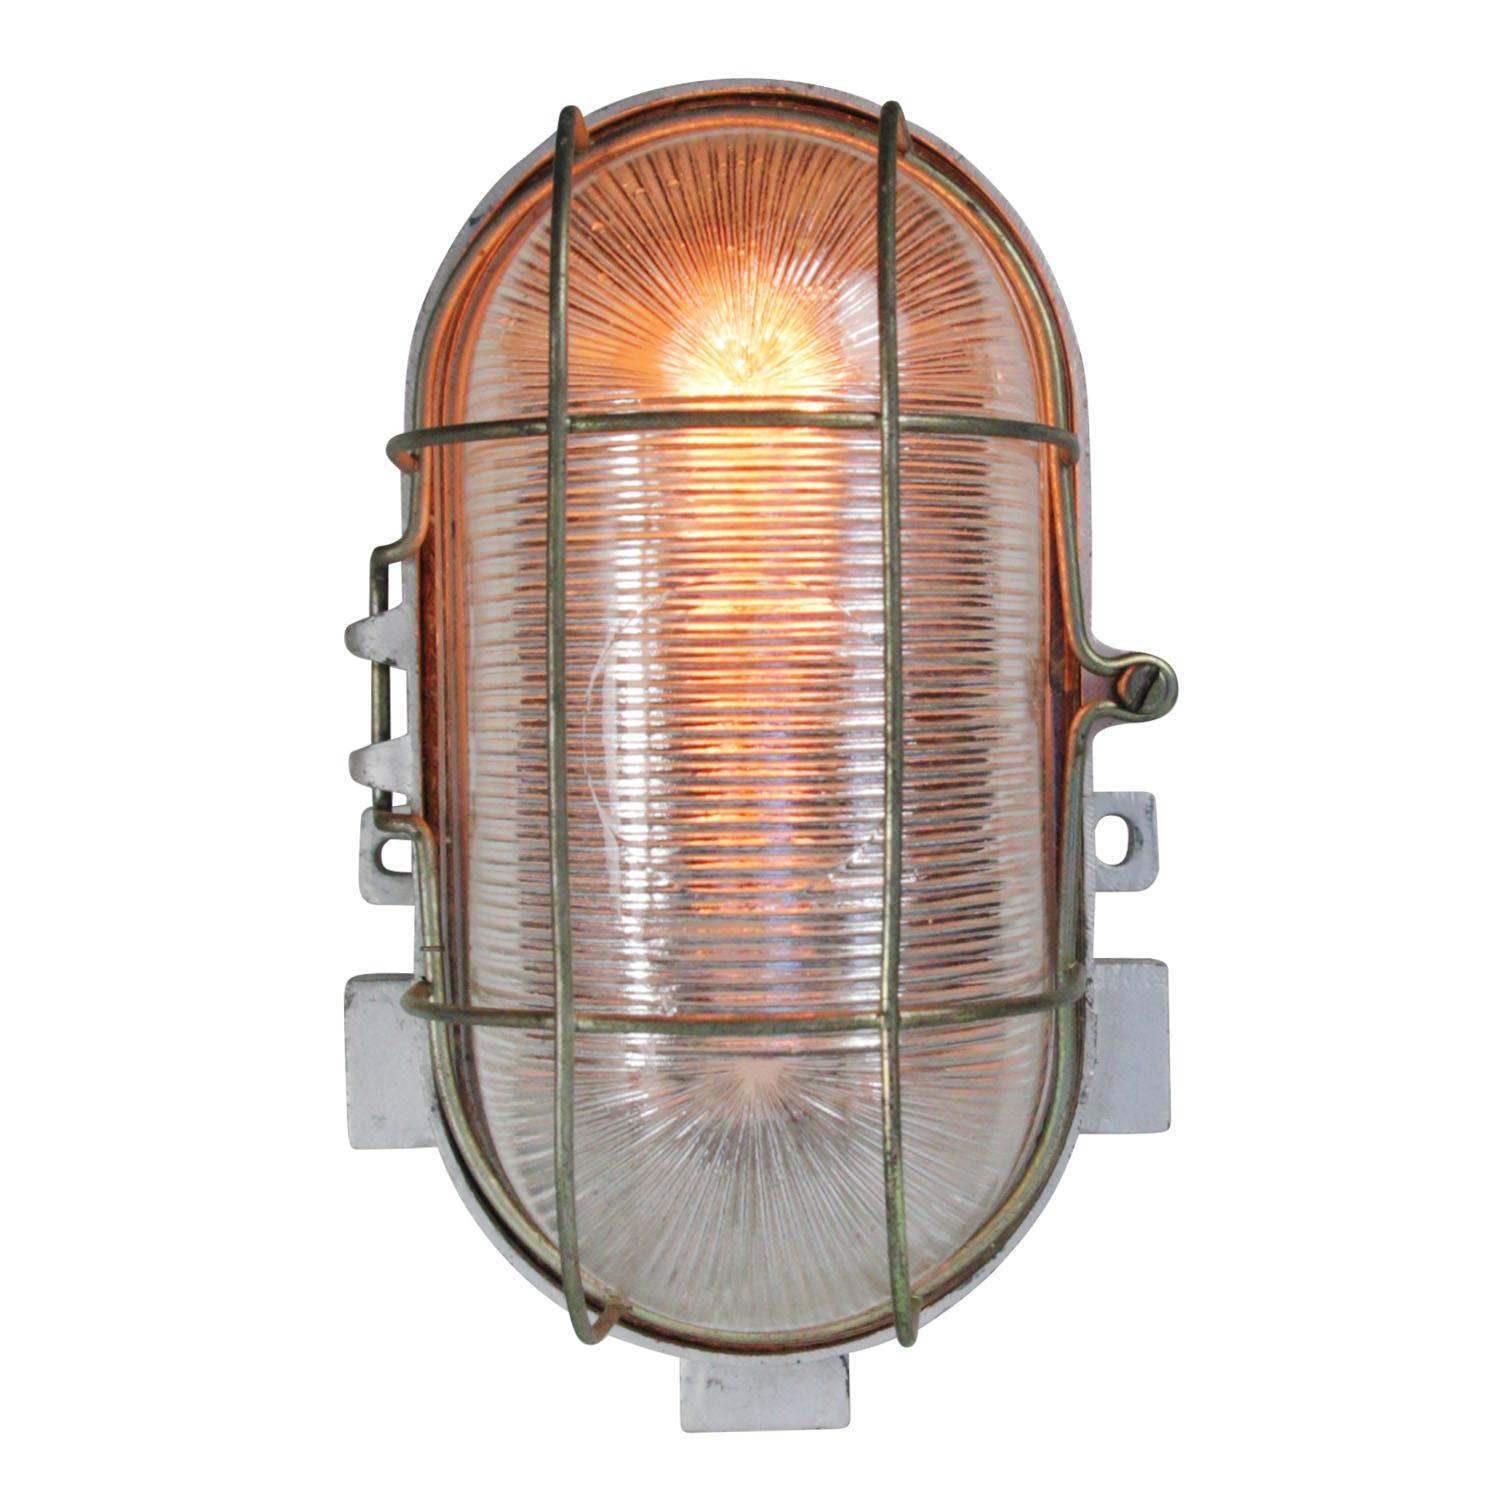 industrial wall or ceiling lamp by RZB Rudolph Zimmerman Bamberg Leuchten
cast aluminum, striped glass

Weight: 0.90 kg / 2 lb

Priced per individual item. All lamps have been made suitable by international standards for incandescent light